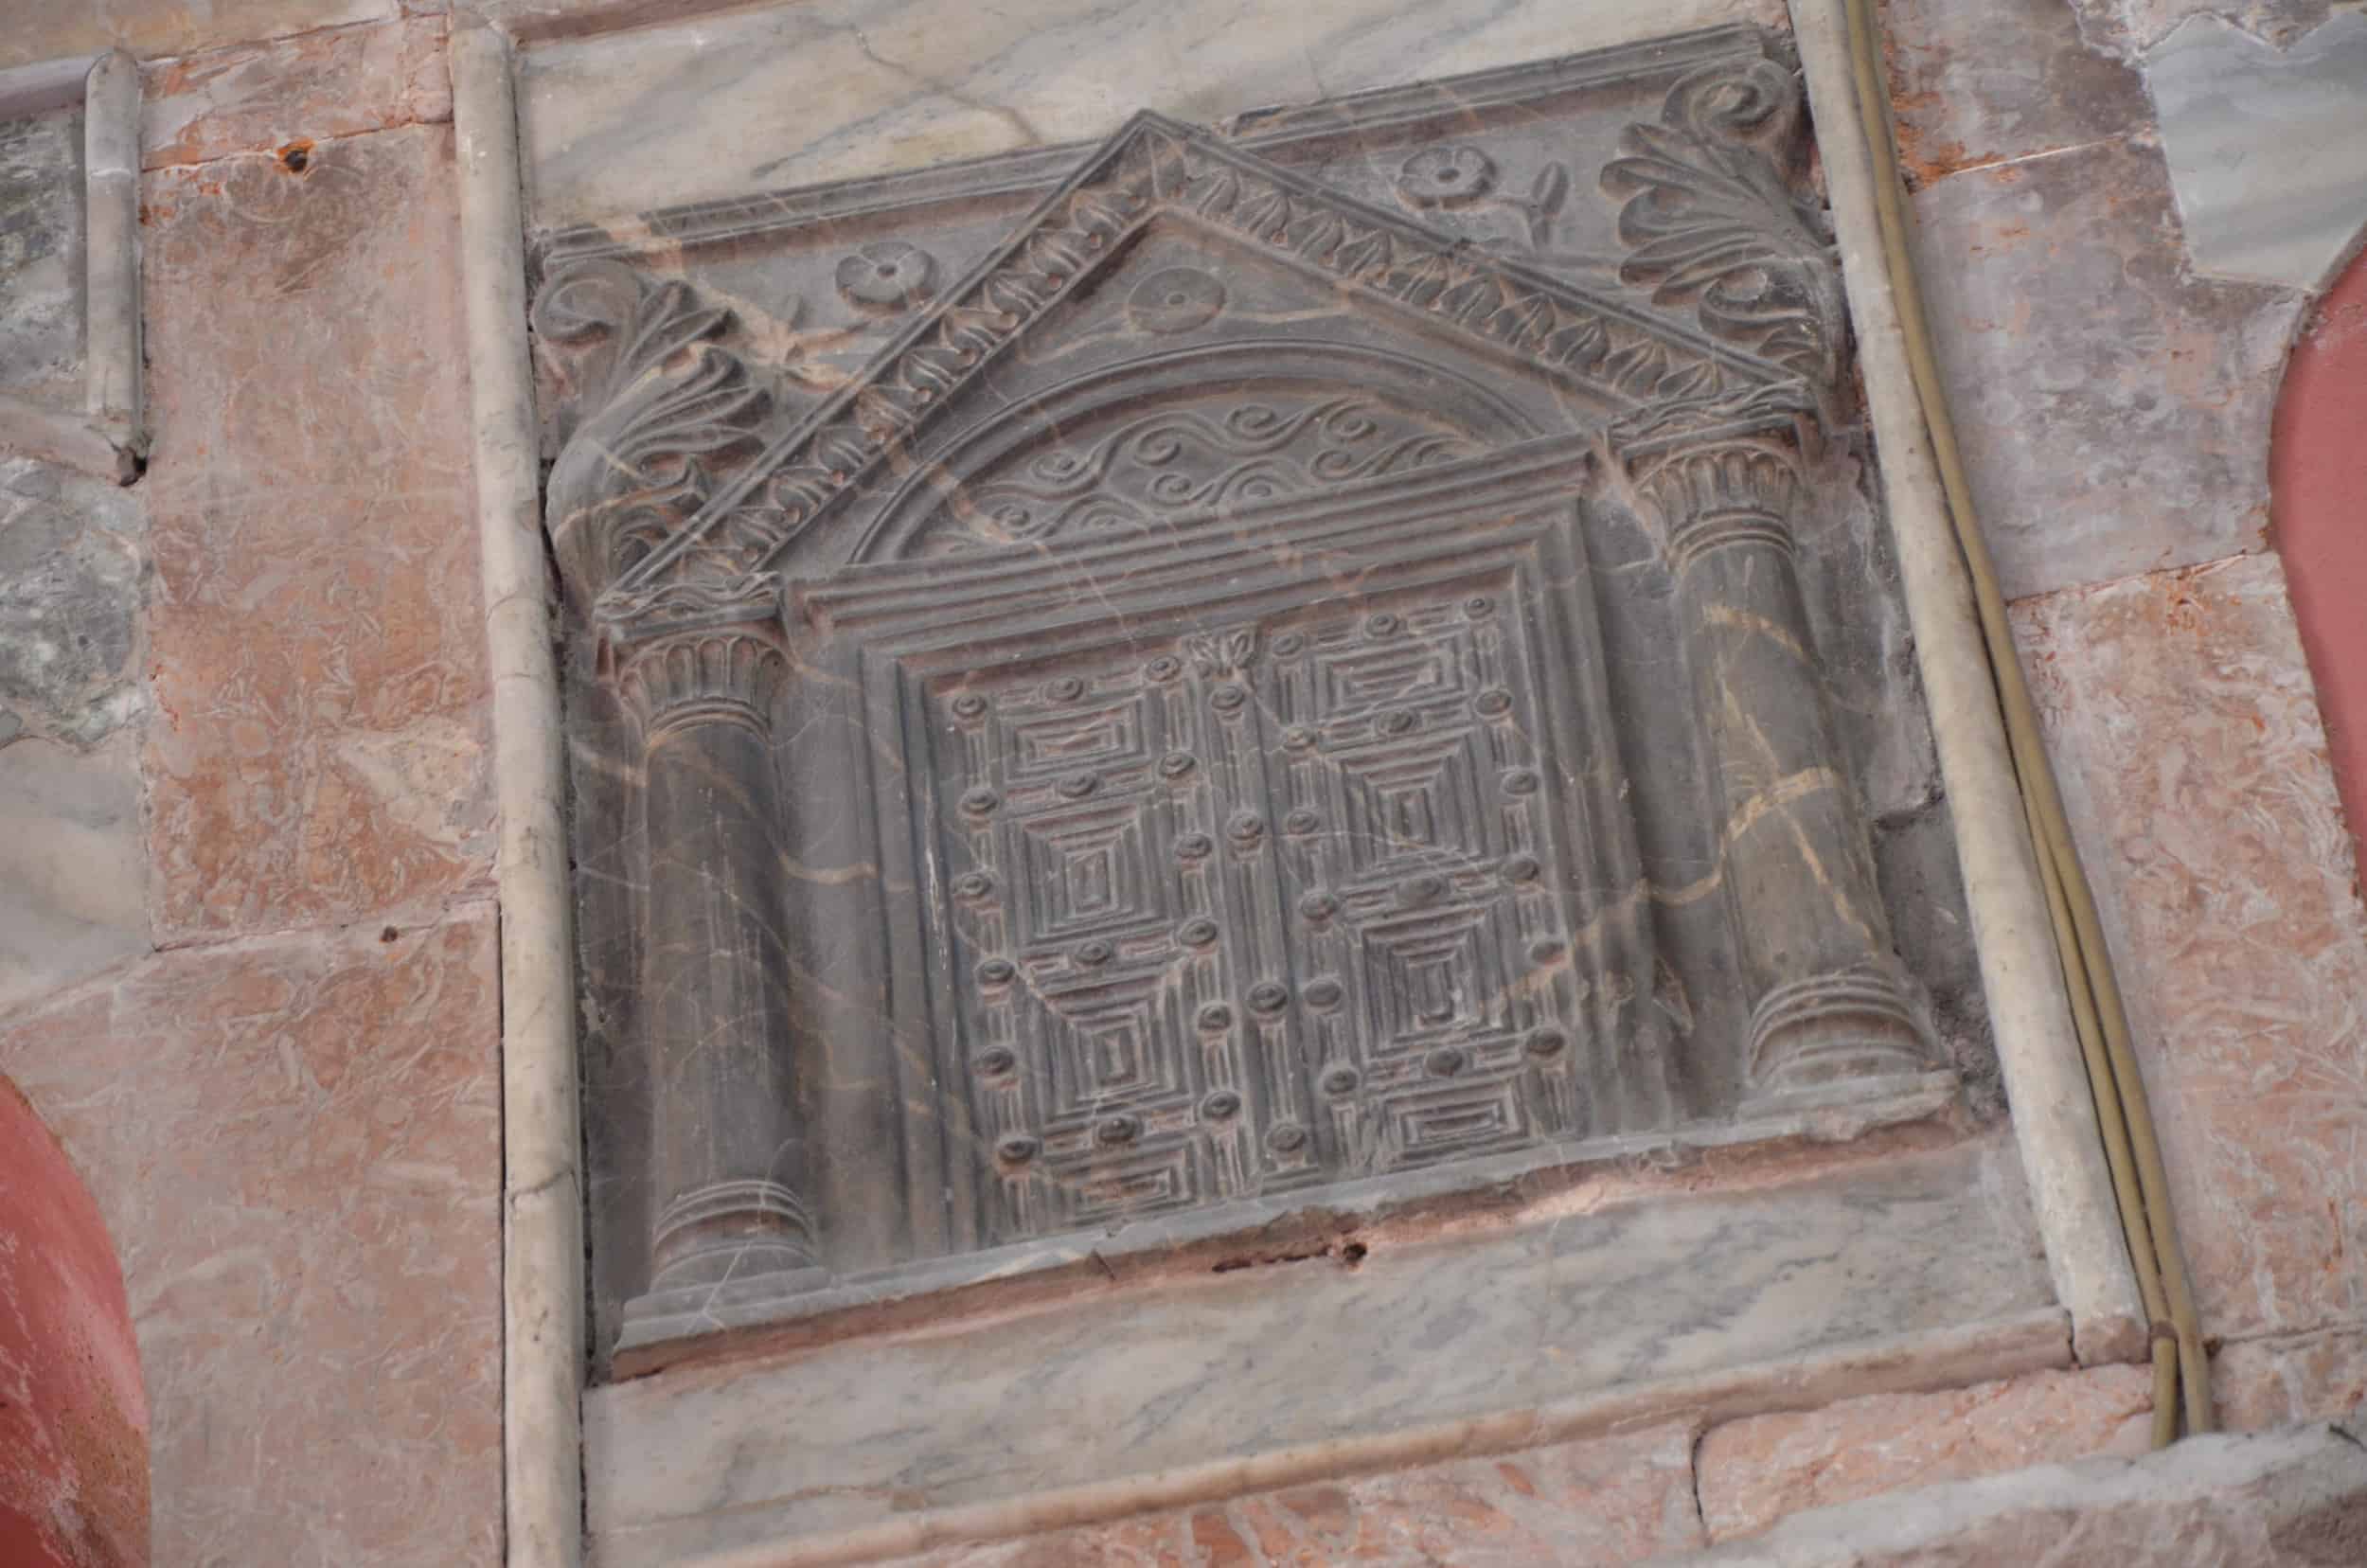 Relief panel at the Kalenderhane Mosque